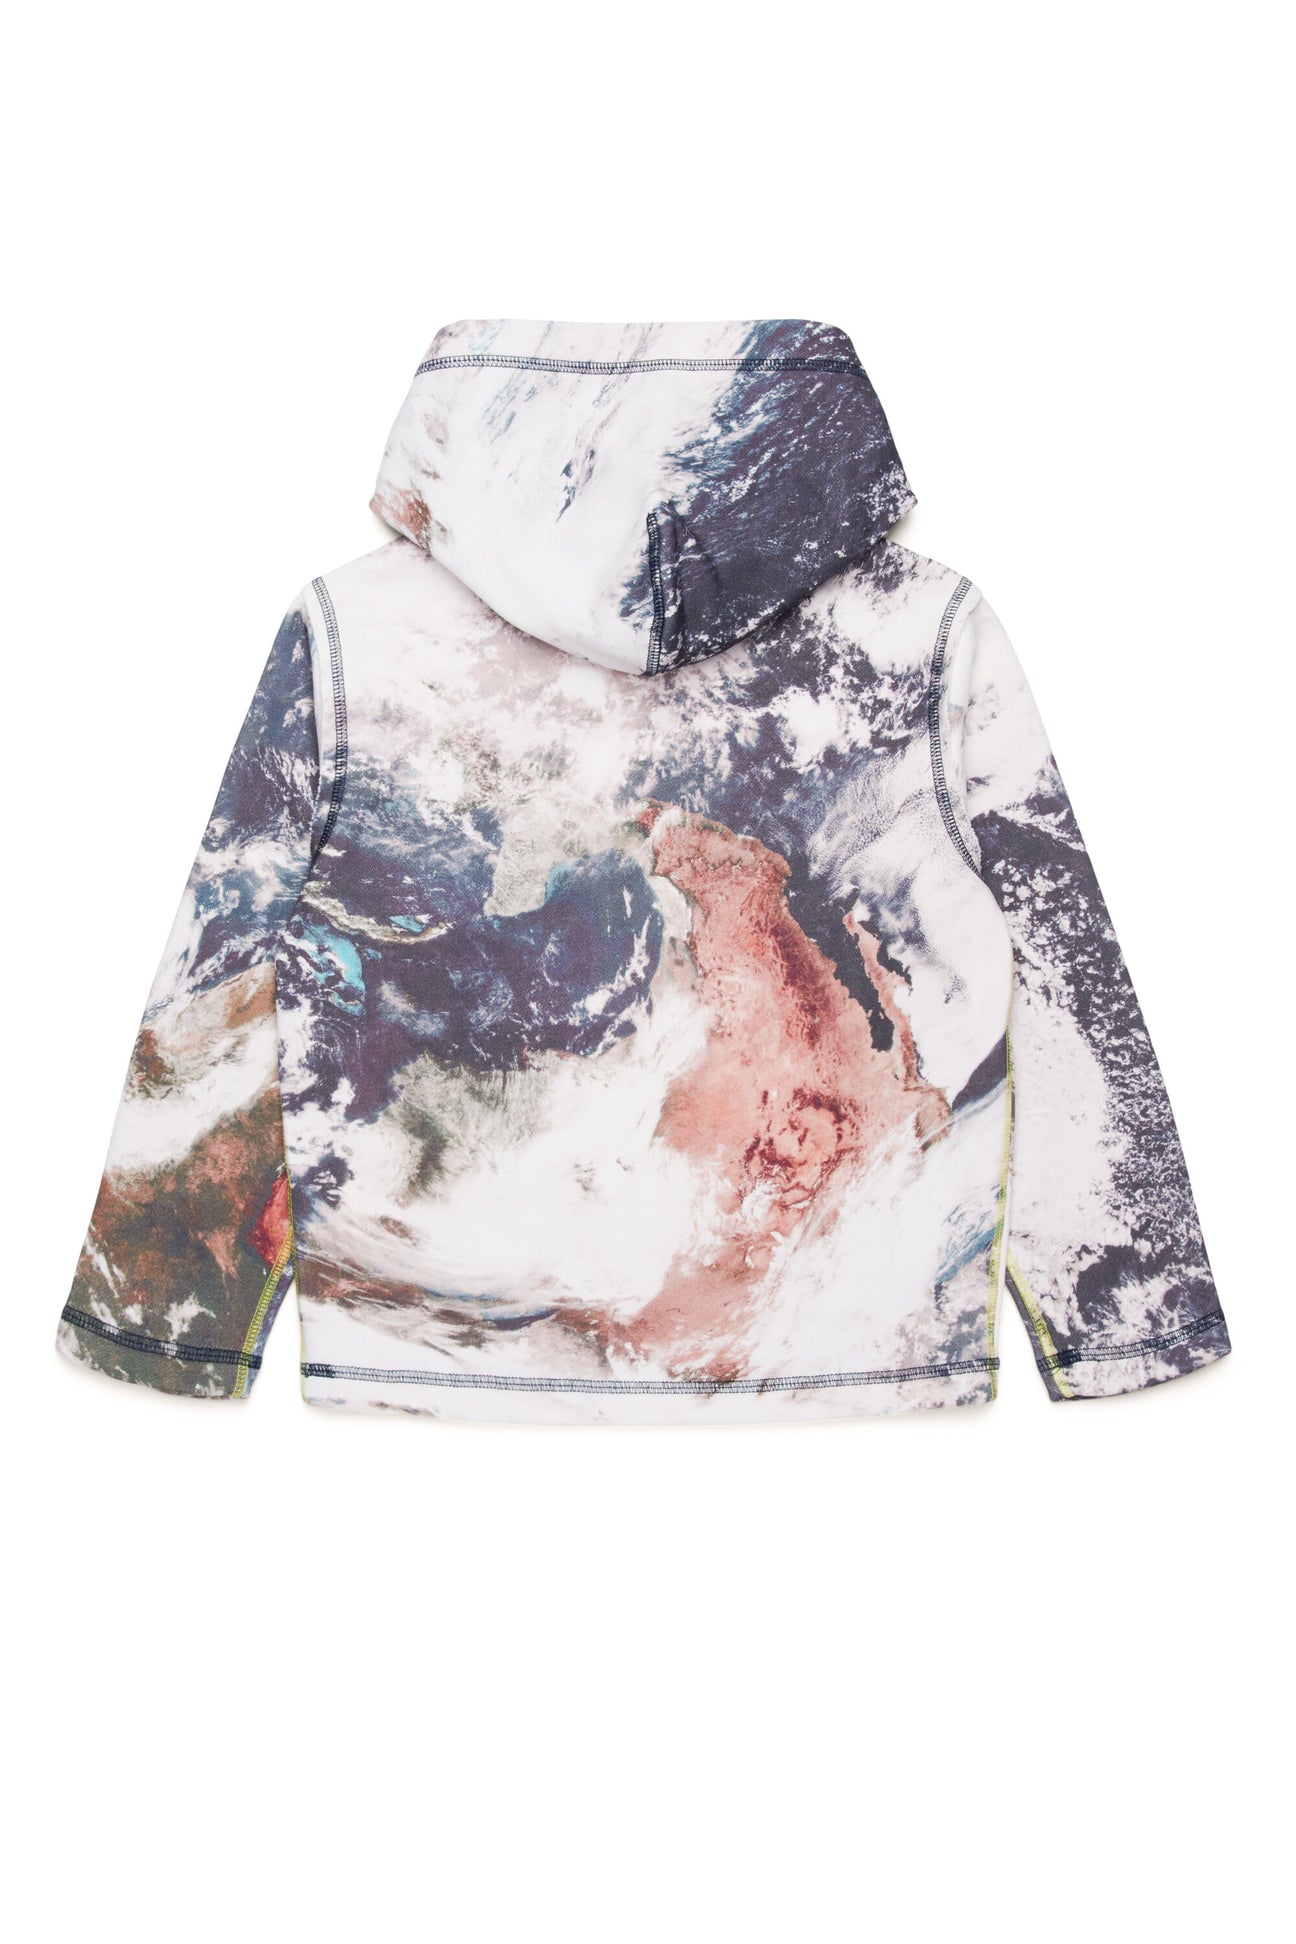 All-over Planet Camou hooded sweatshirt All-over Planet Camou hooded sweatshirt